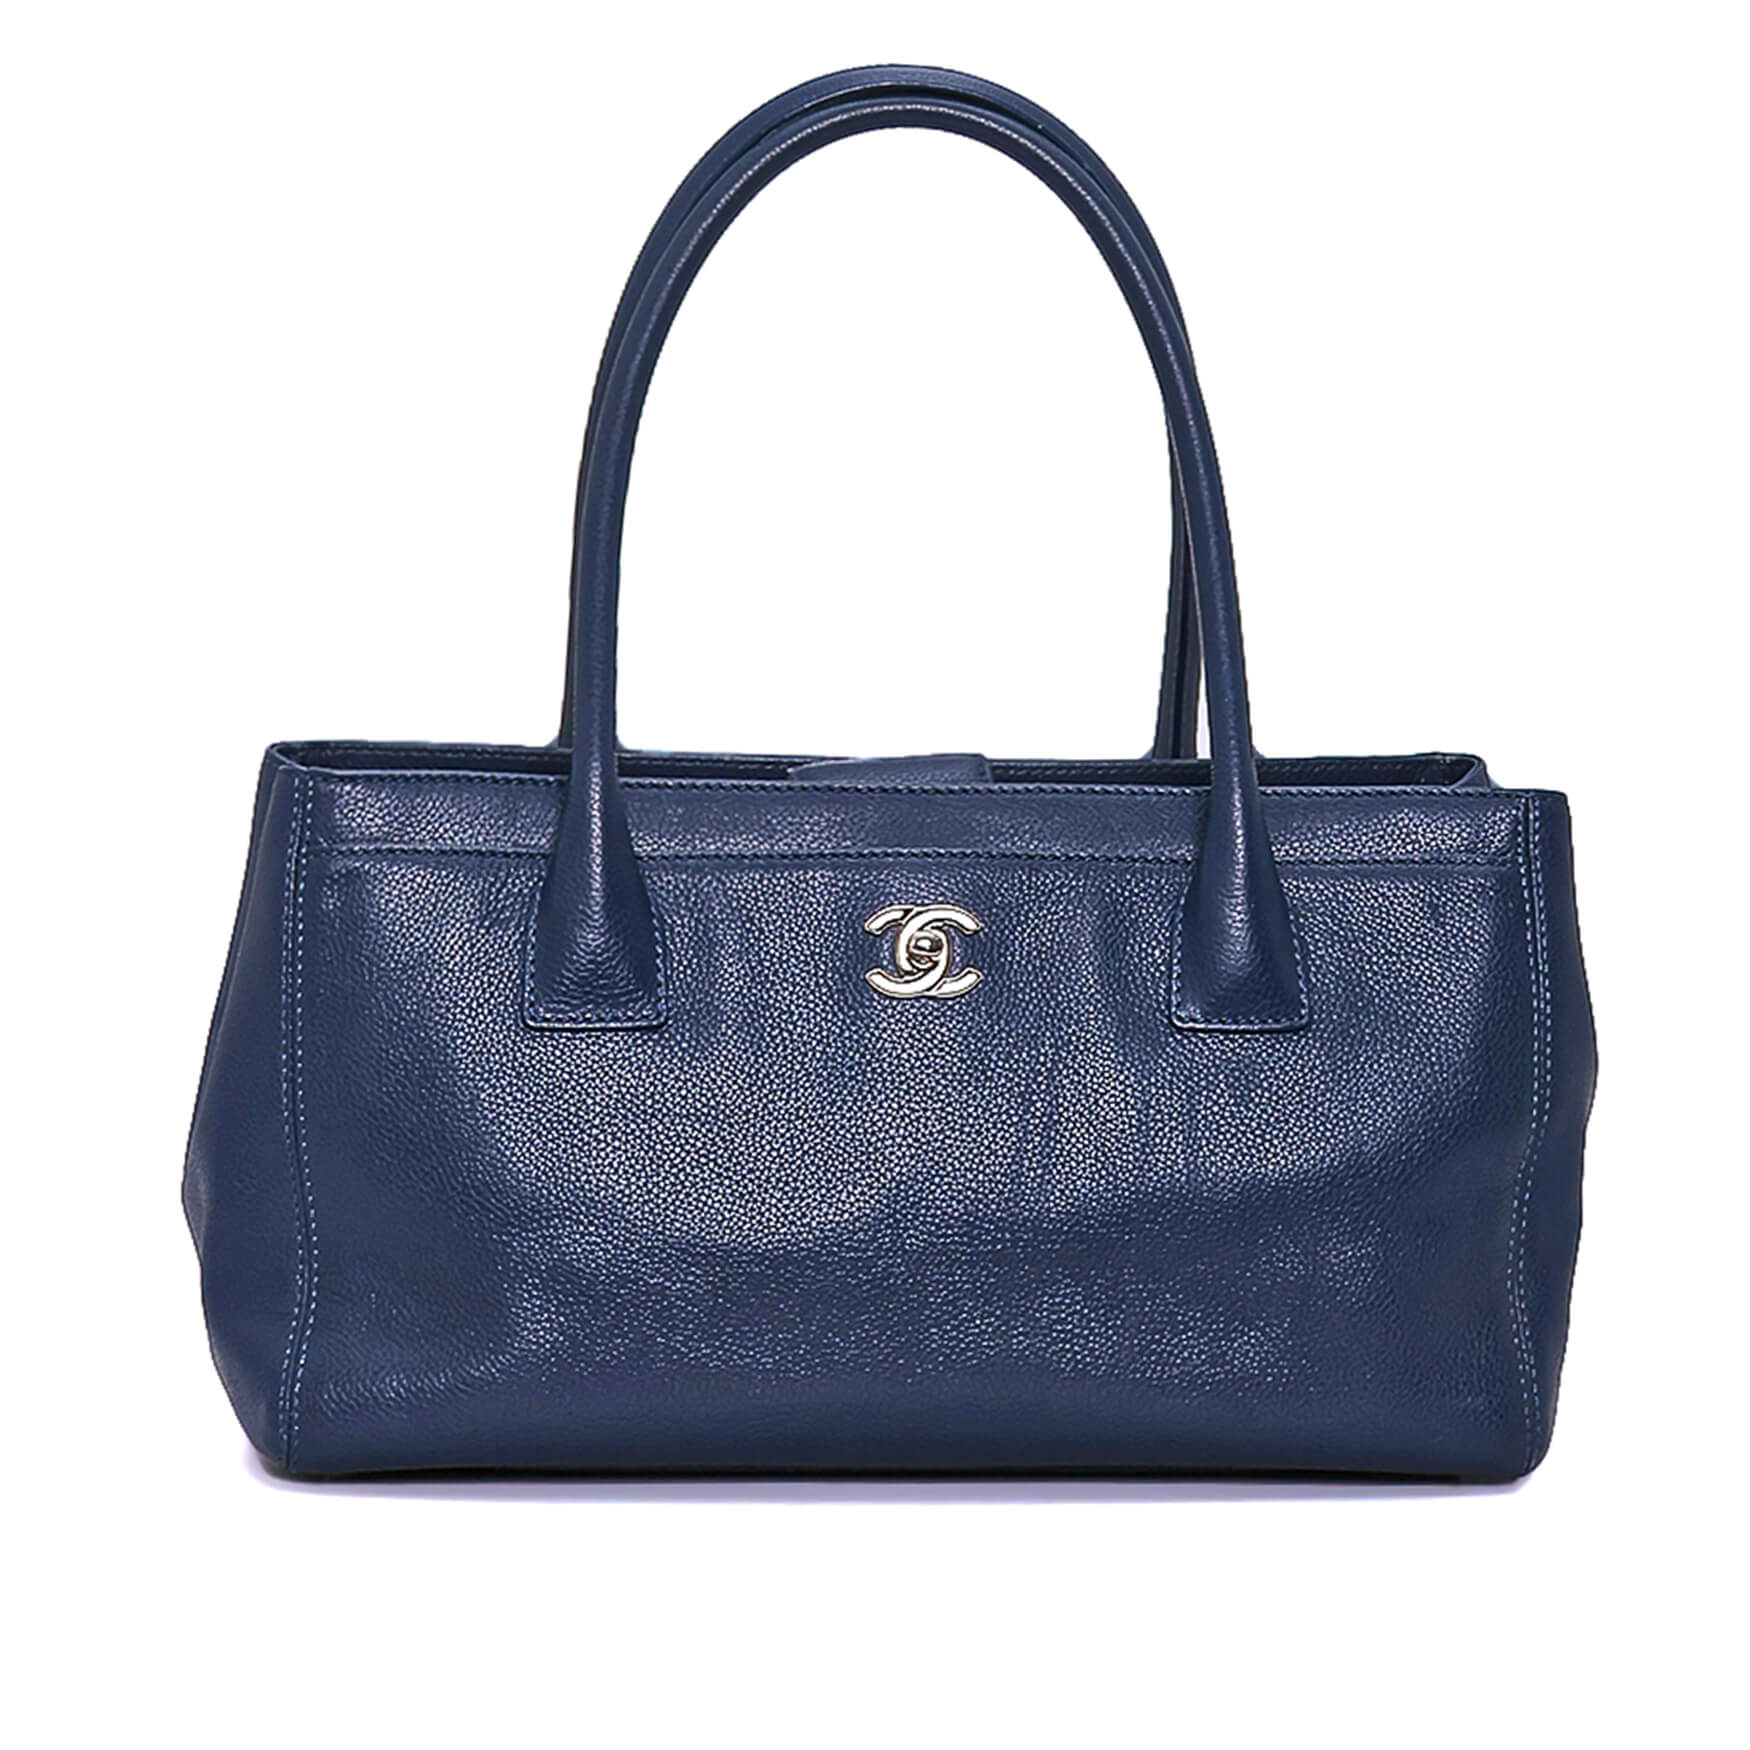 Chanel - Navy Blue Grained Leather Executive Small Bag